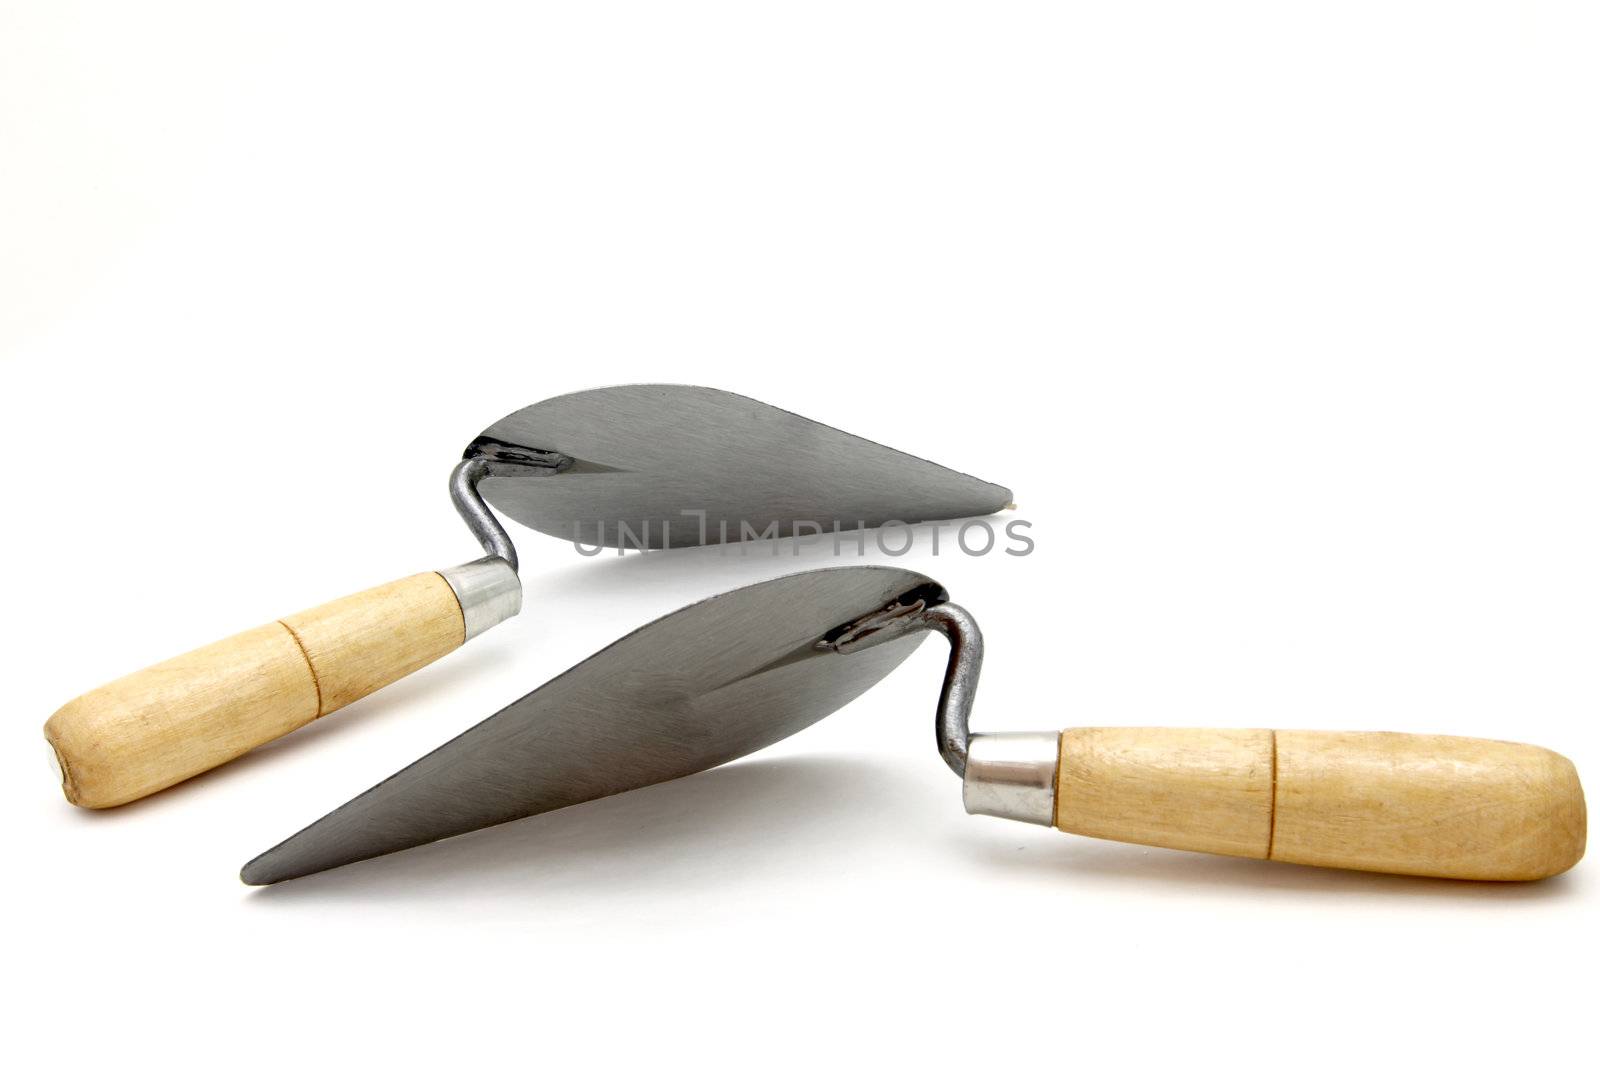 set of construction lute trowels by vichie81